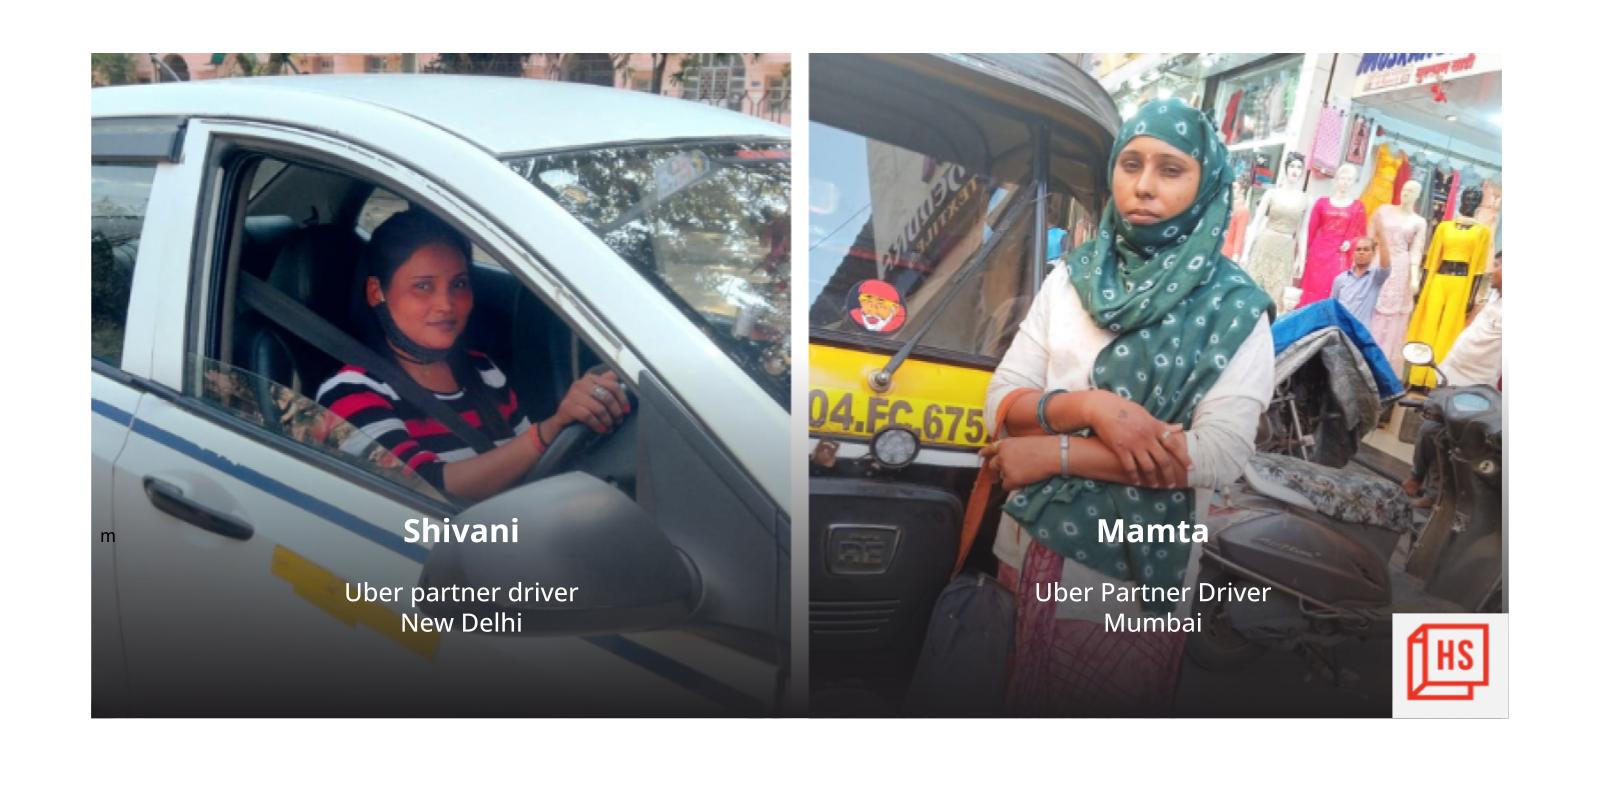 [Women’s Day] How two Uber driver-partners braved the pandemic, bringing their lives back on track